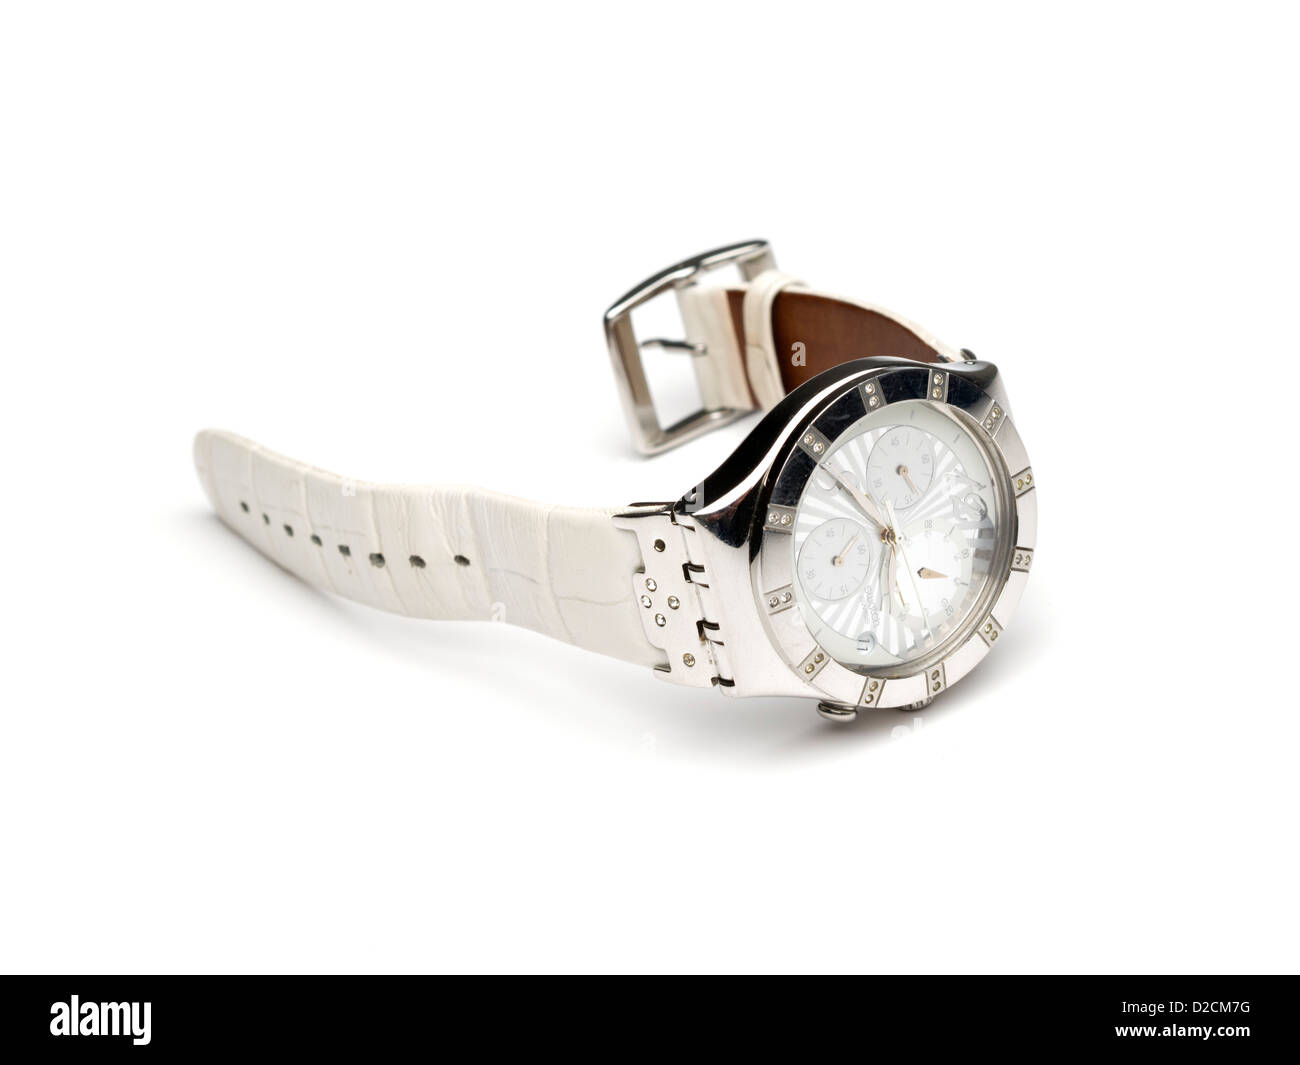 White Swatch wristwatch isolated on white background Stock Photo